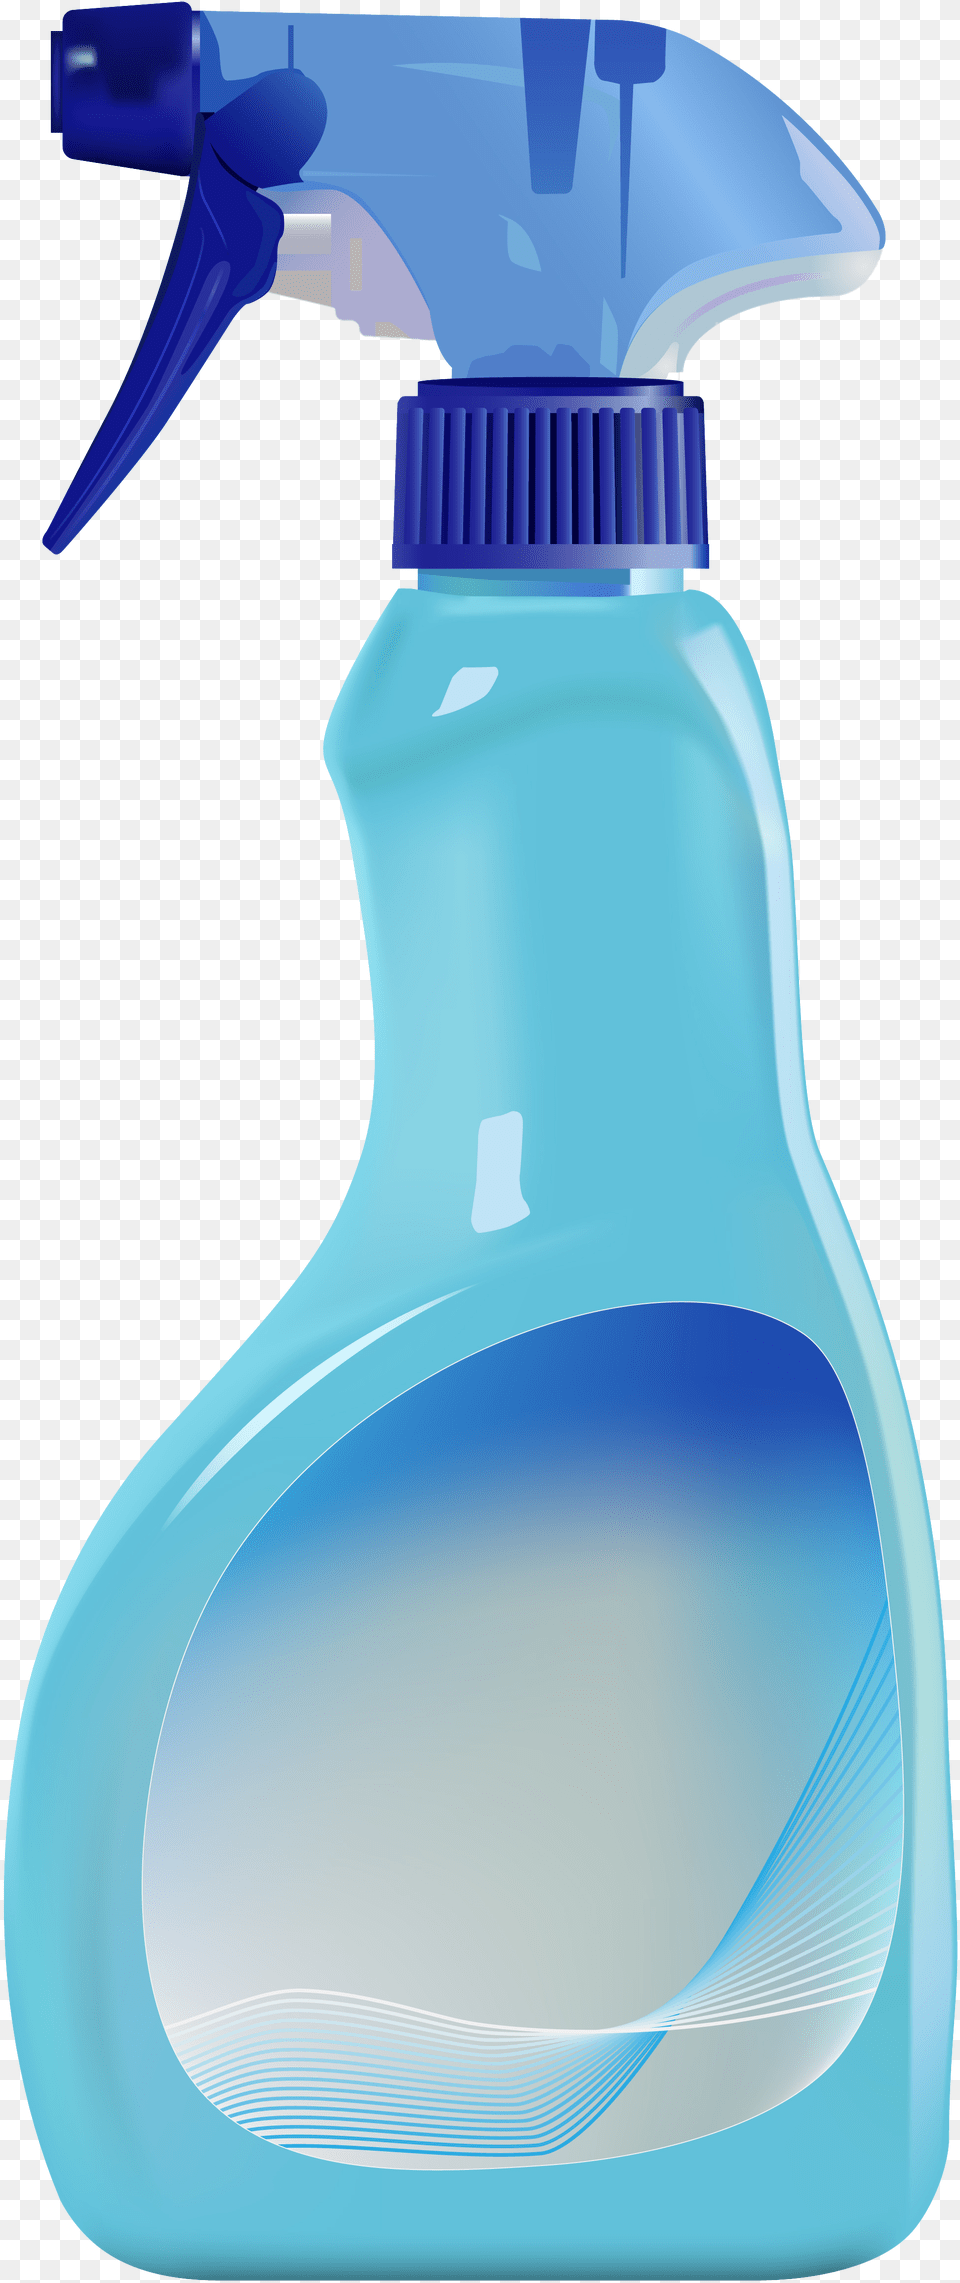 Plastic Bottle Spray Bottle, Can, Spray Can, Tin Free Transparent Png